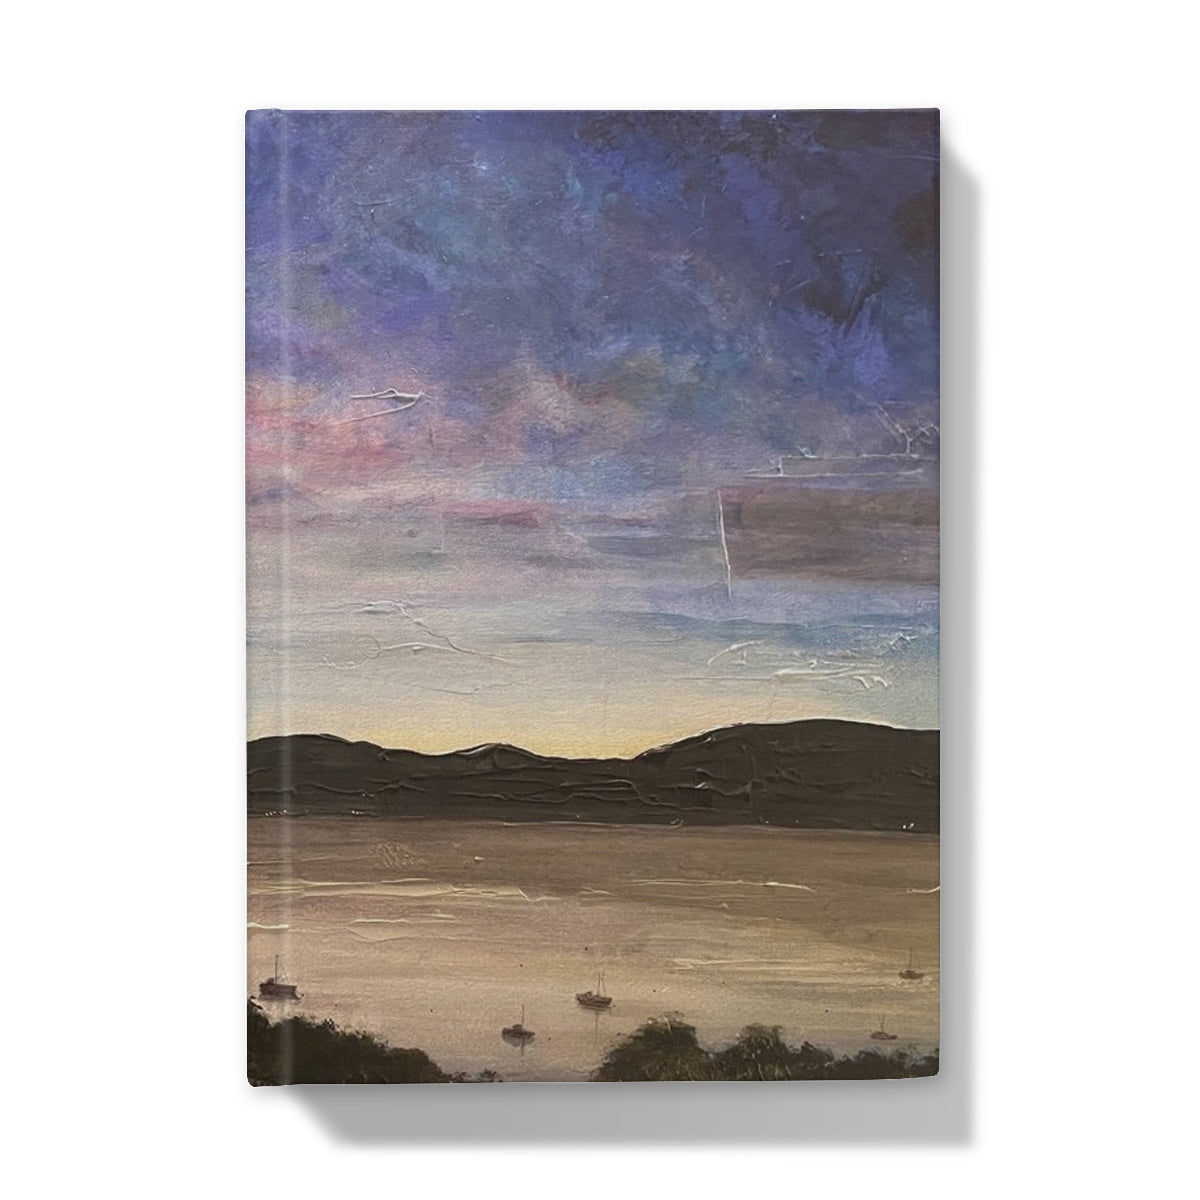 River Clyde Twilight Art Gifts Hardback Journal-Journals & Notebooks-River Clyde Art Gallery-5"x7"-Lined-Paintings, Prints, Homeware, Art Gifts From Scotland By Scottish Artist Kevin Hunter